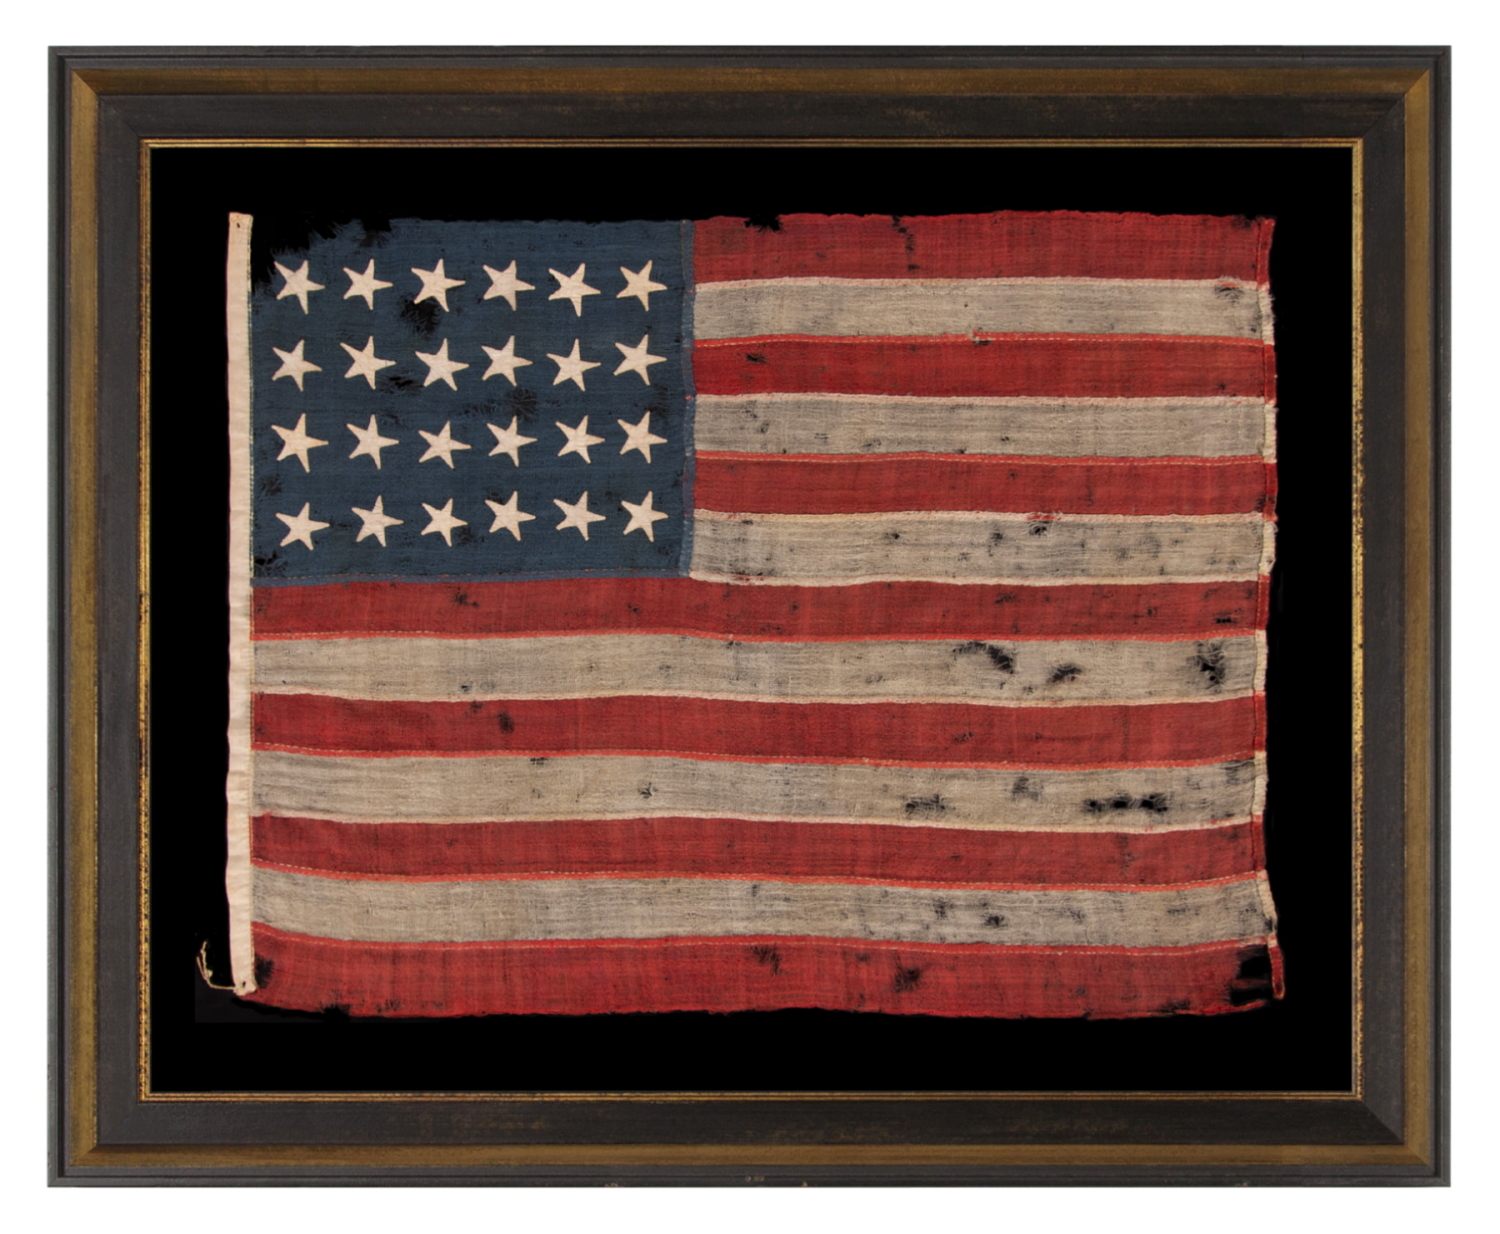 24 STAR ANTIQUE AMERICAN FLAG, MADE IN THE PERIOD WHEN MISSOURI WAS THE MOST RECENT STATE TO JOIN THE UNION, 1821-1836, EXTRAORDINARILY RARE, WITH ITS CANTON RESTING ON THE “WAR STRIPE” OR “BLOOD STRIPE, AND IN A REMARKABLY TINY SCALE AMONG FLAGS OF THIS ERA